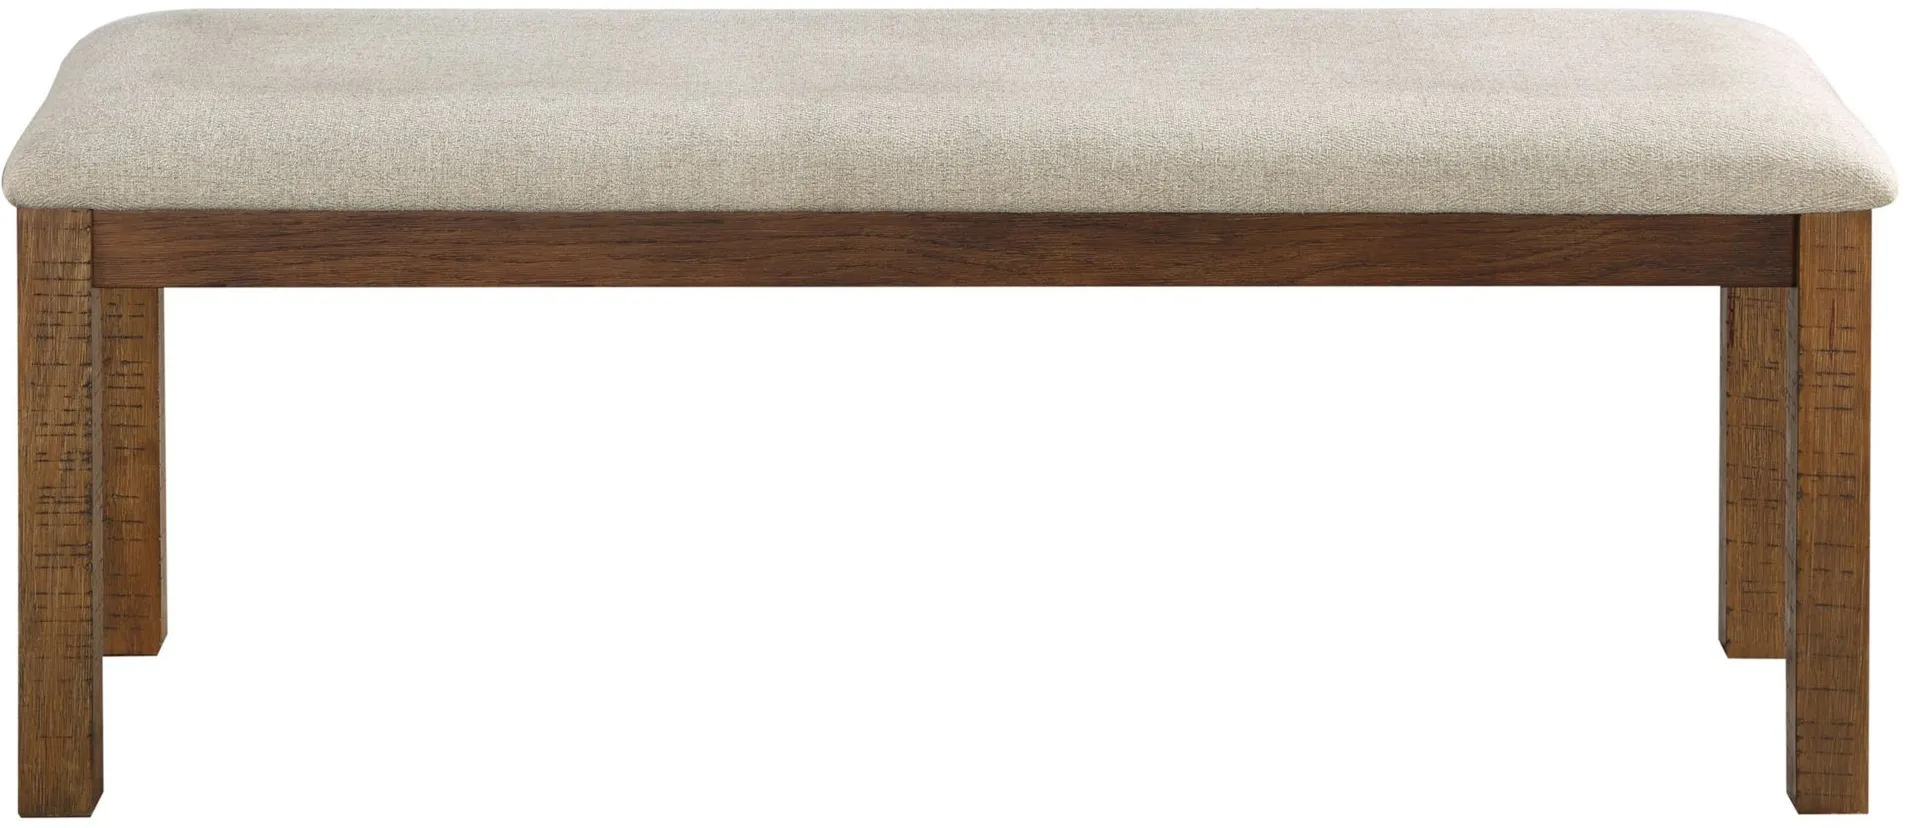 Levittown Dining Bench in Brown by Homelegance